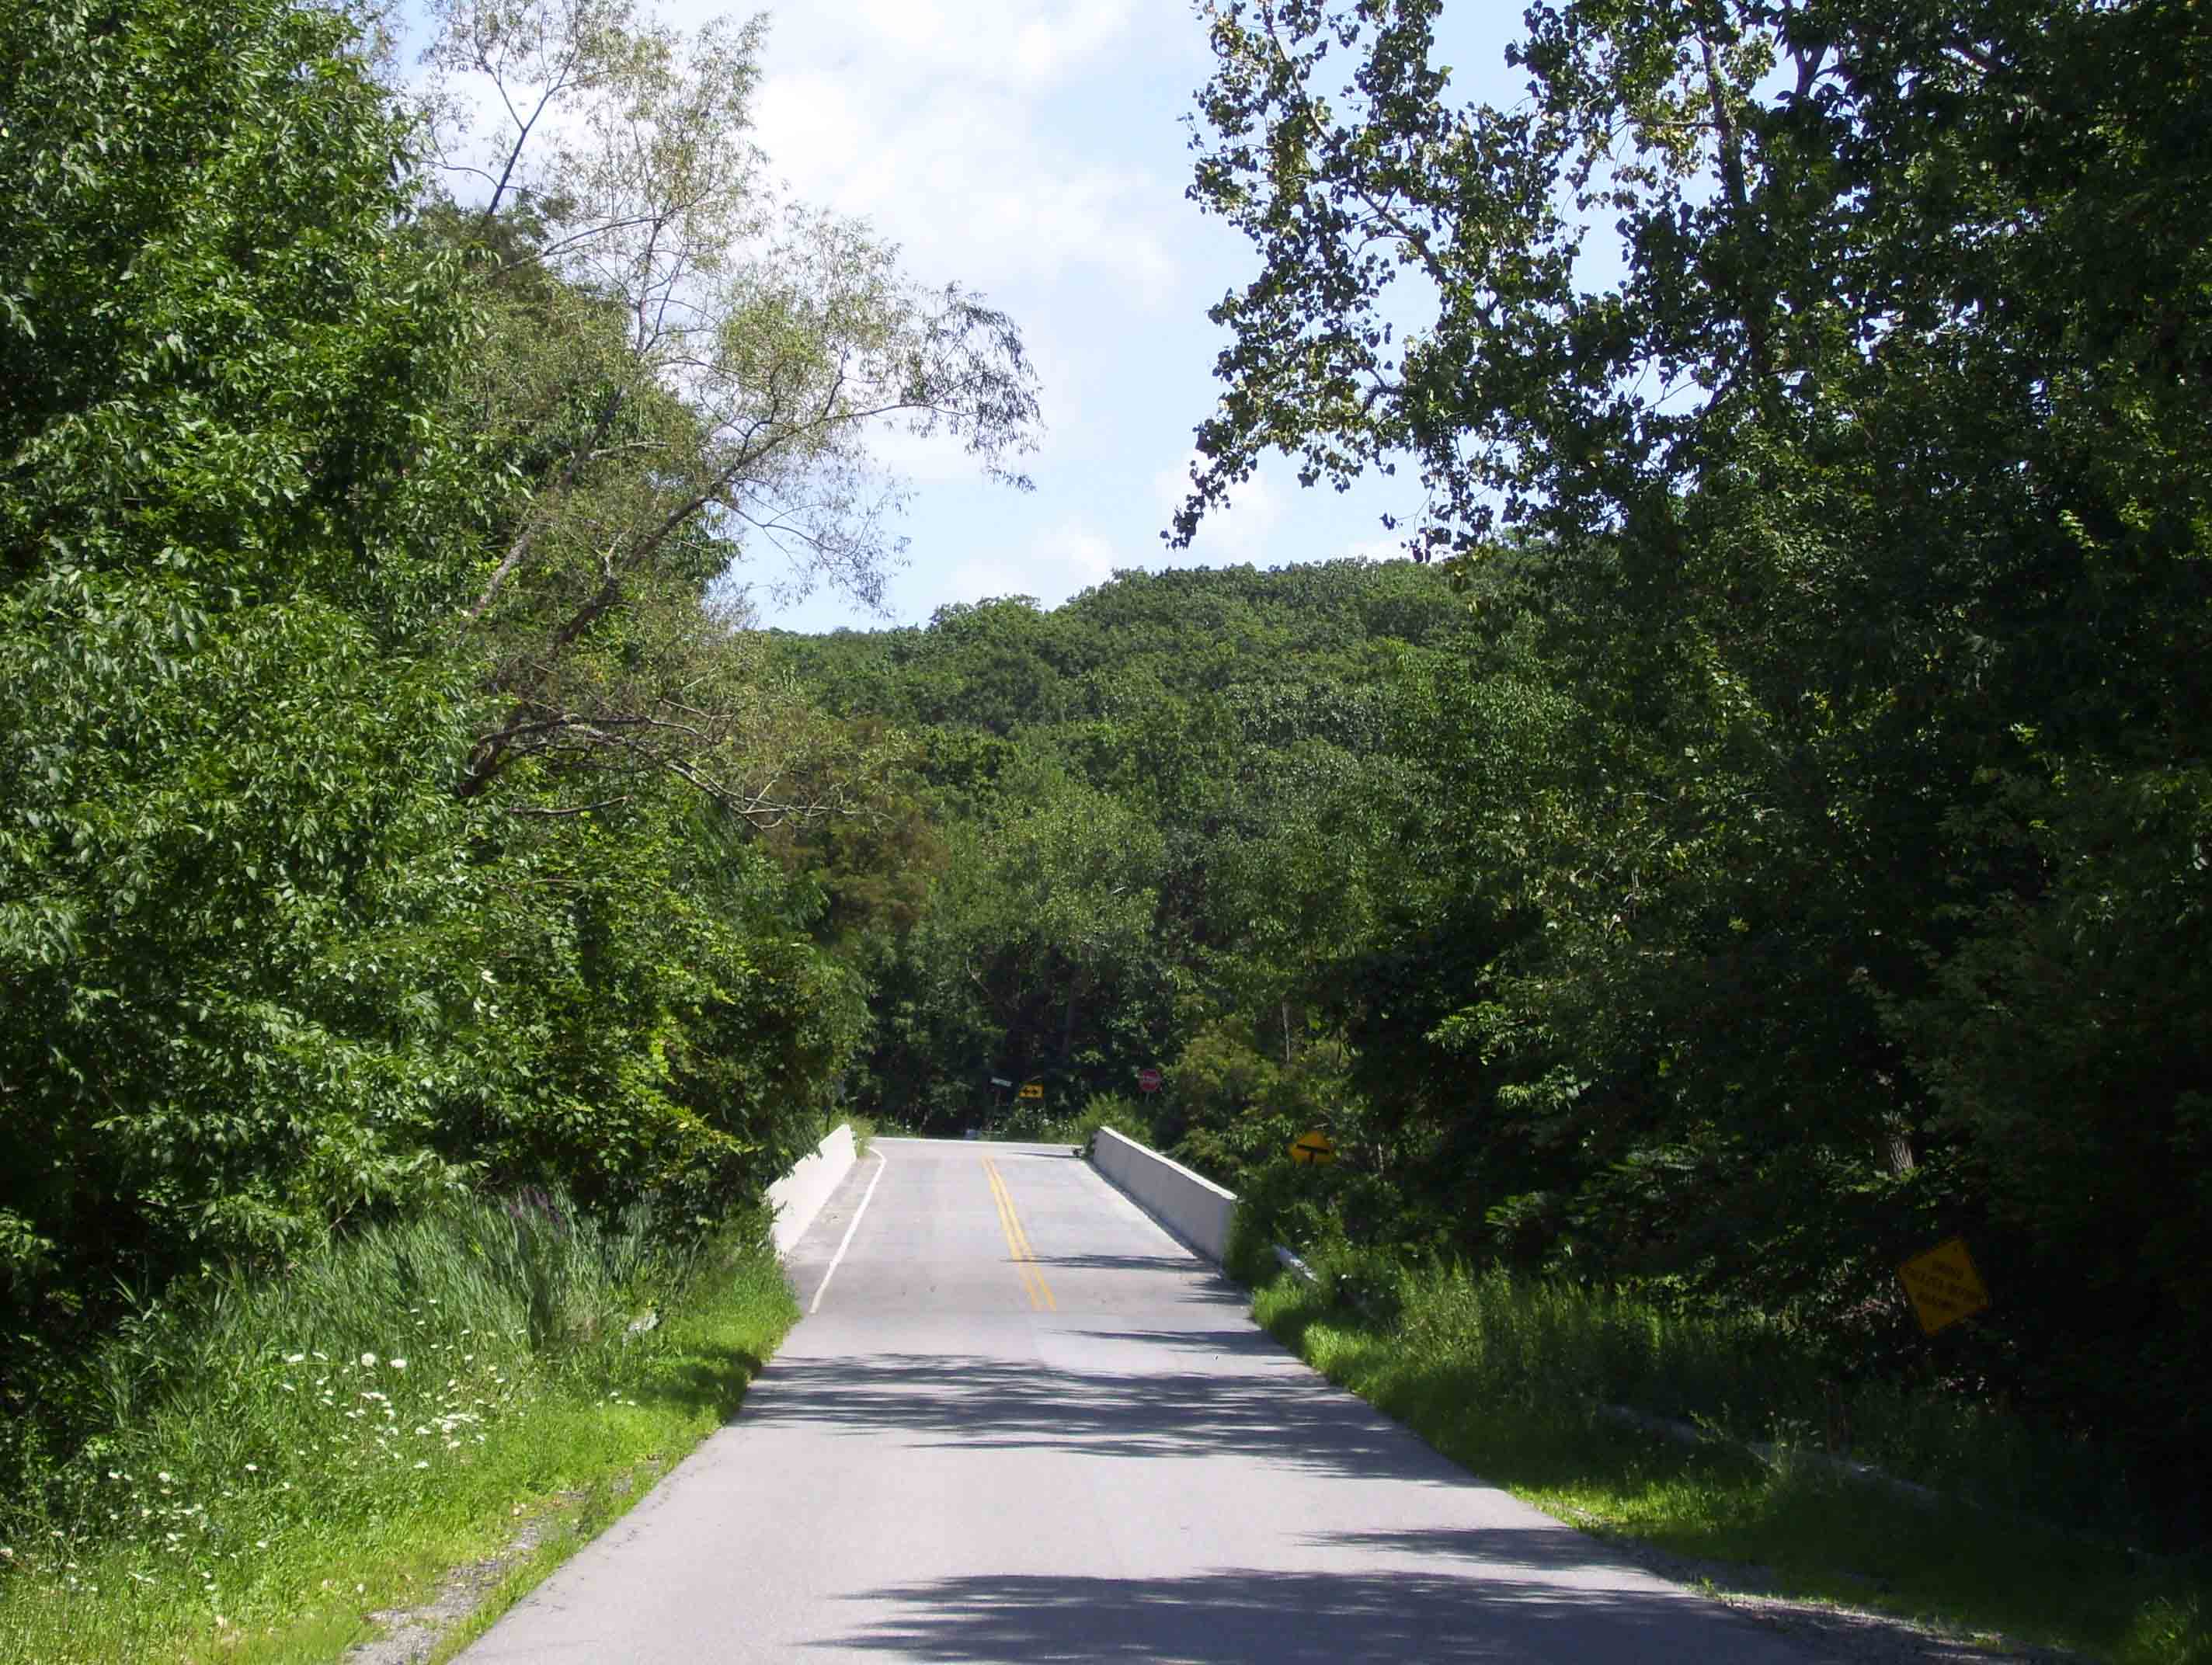 Stormville Mountain Road. The northbound trail follow this across the bridge over I-84, then continues straight ahead into the woods at the T intersection (Stormville Mountain Road and Grape Hollow Road) on the other side. Taken from approx. mm 6.0   Courtesy dlcul@conncoll.edu